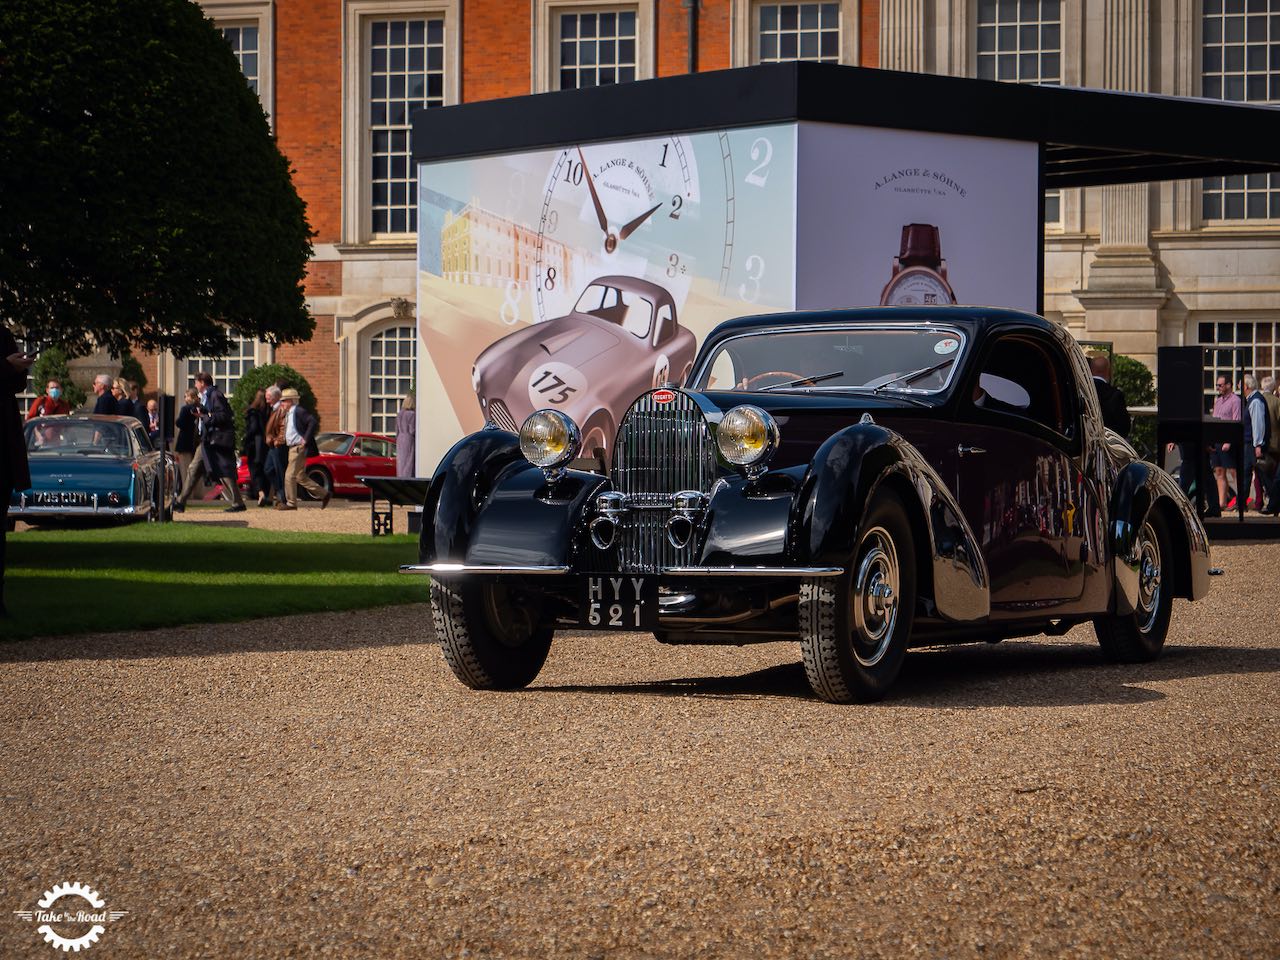 Concours of Elegance 2020 - A display of automotive perfection